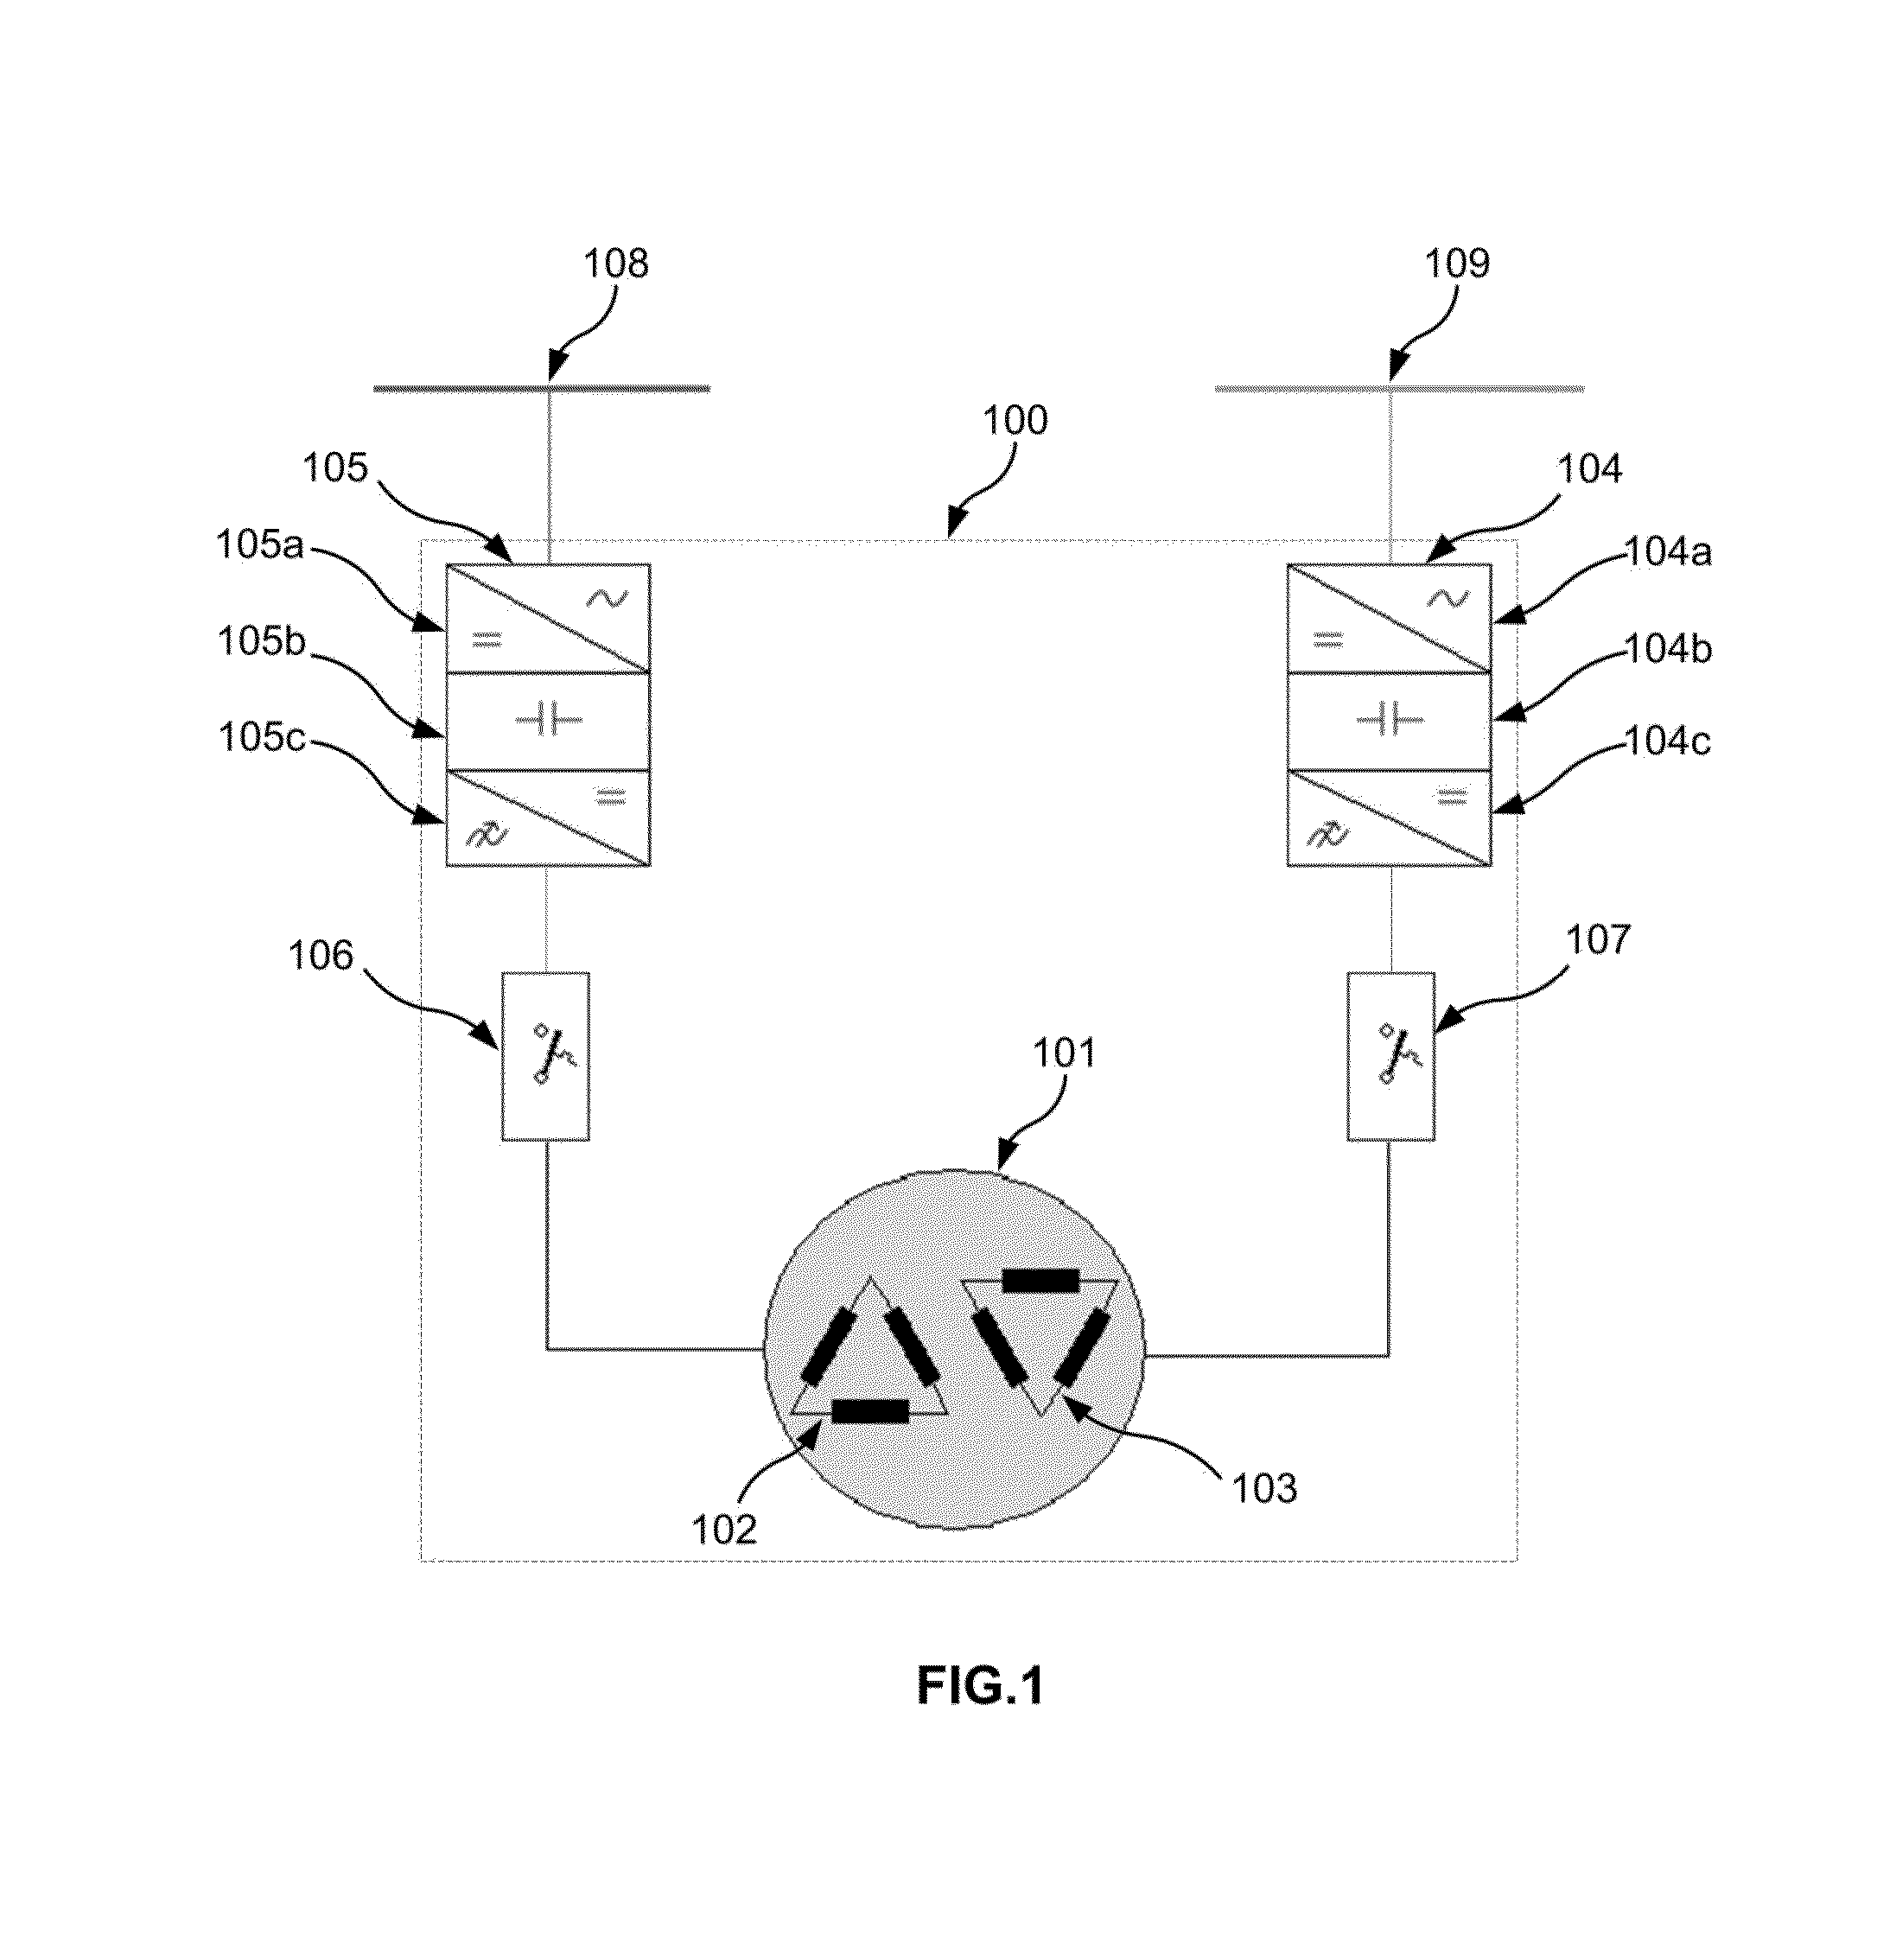 Blade pitch system with a dual winding actuator